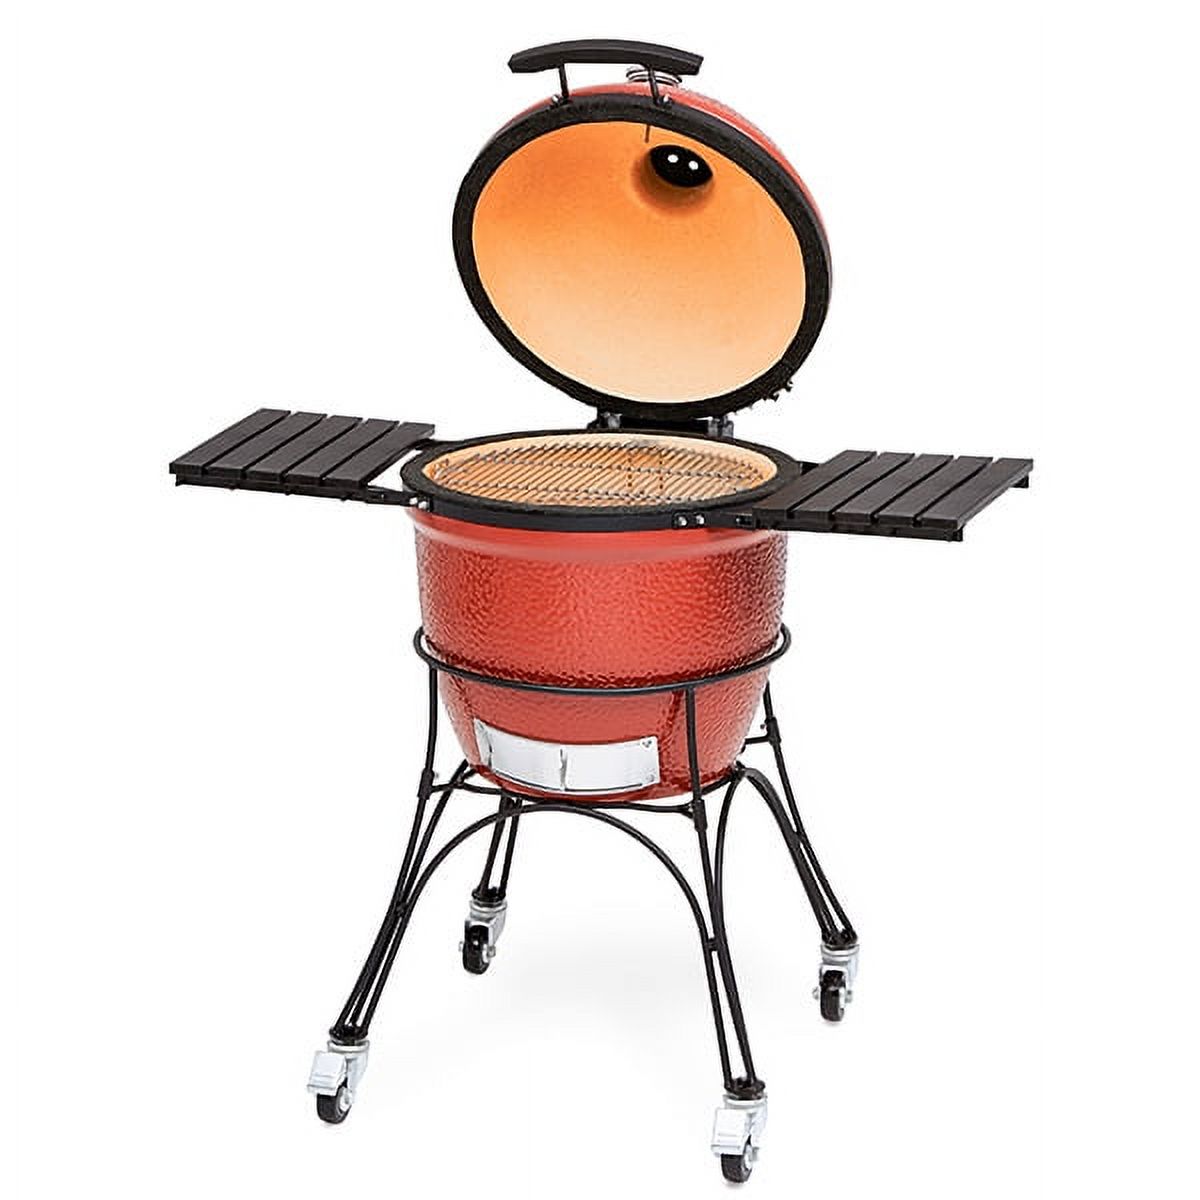 Classic Joe I 18 in. Charcoal Grill in Red with Cart, Side Shelves, Grill Gripper, and Ash Tool - image 3 of 12